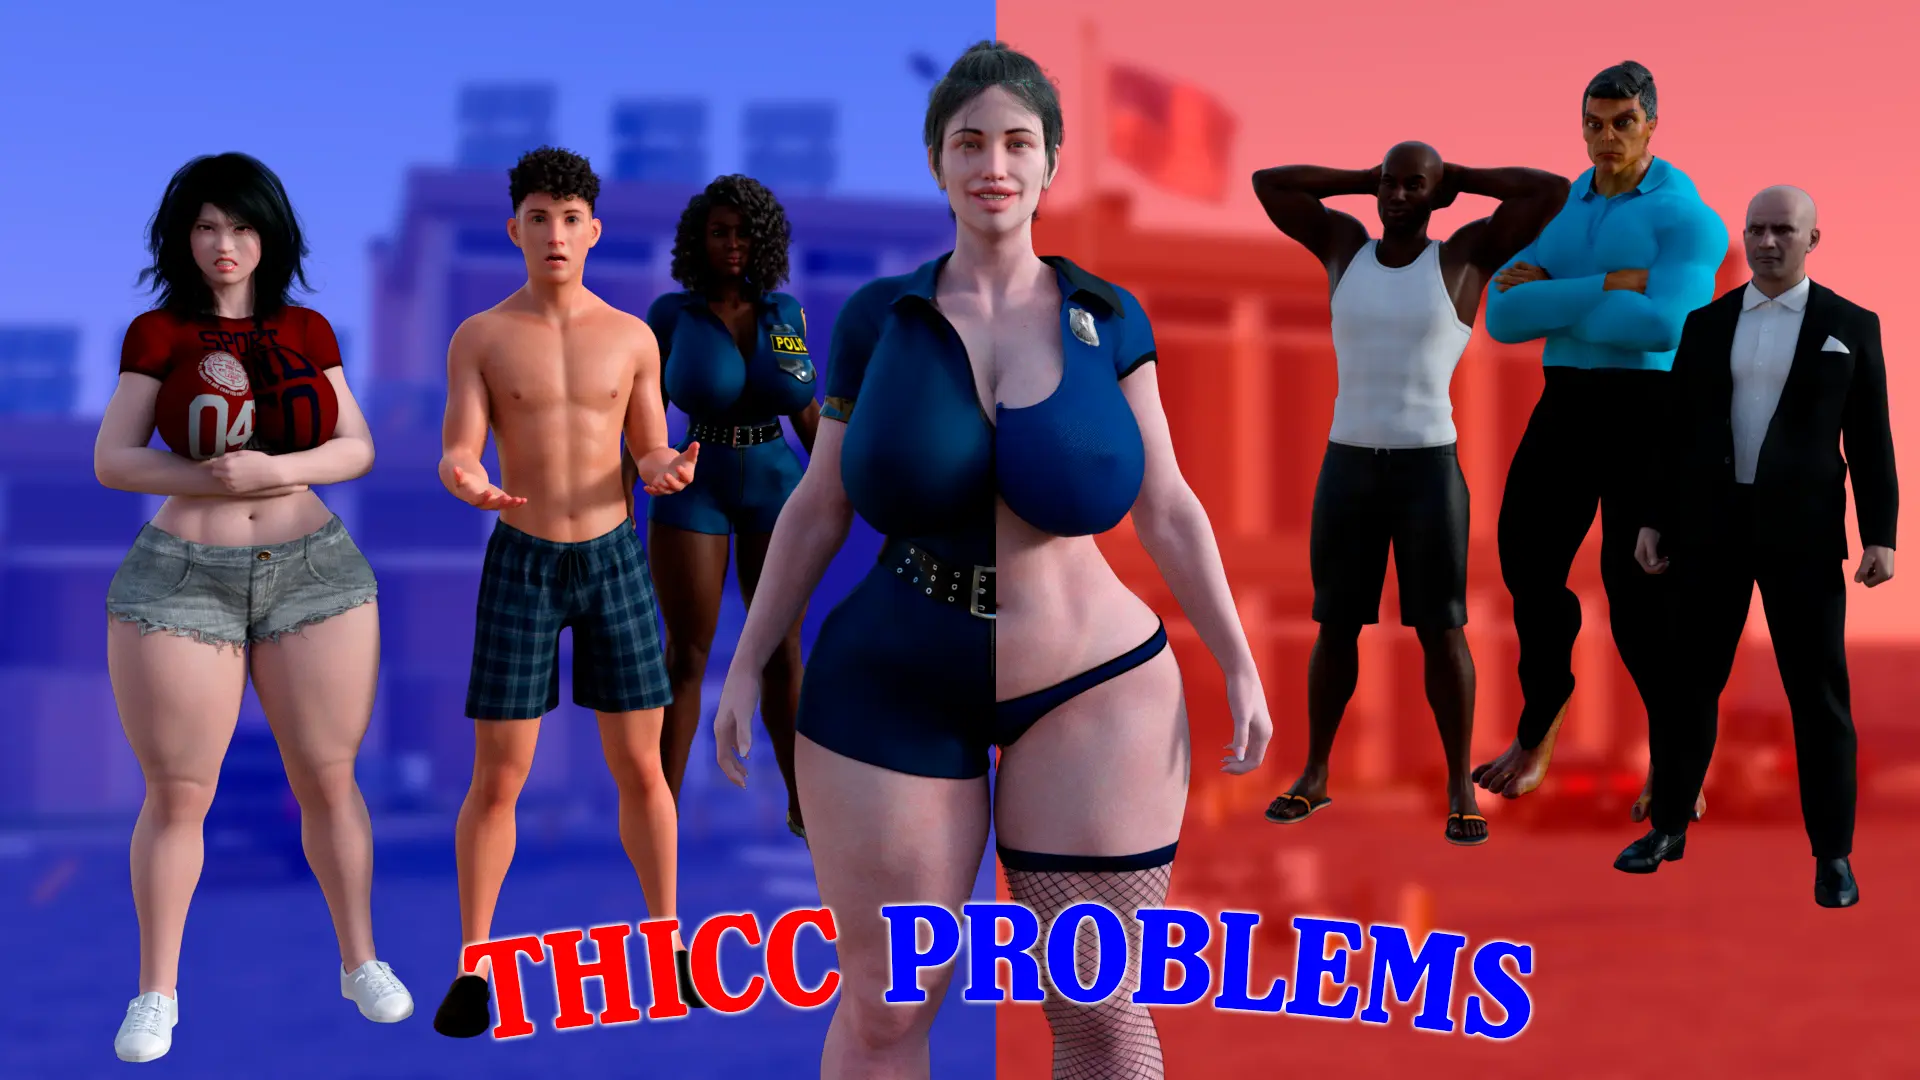 Thicc Problems [v0.0.1] main image